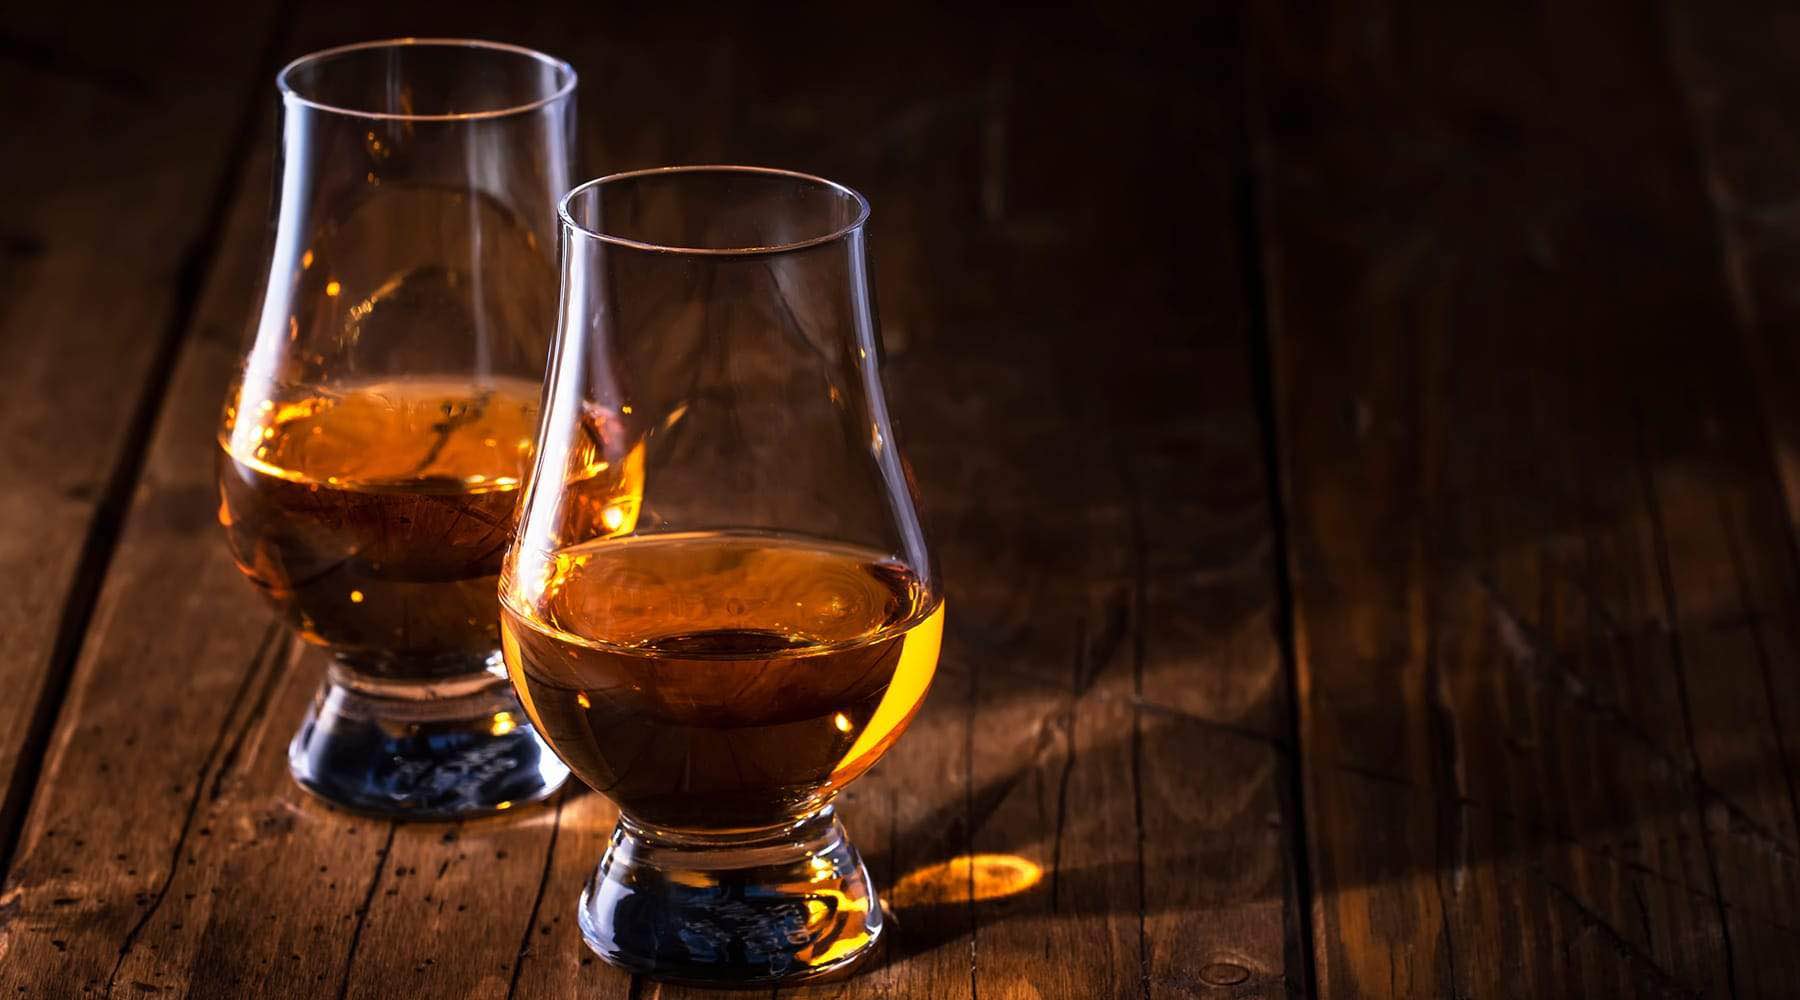 Is whisky / whiskey gluten free?